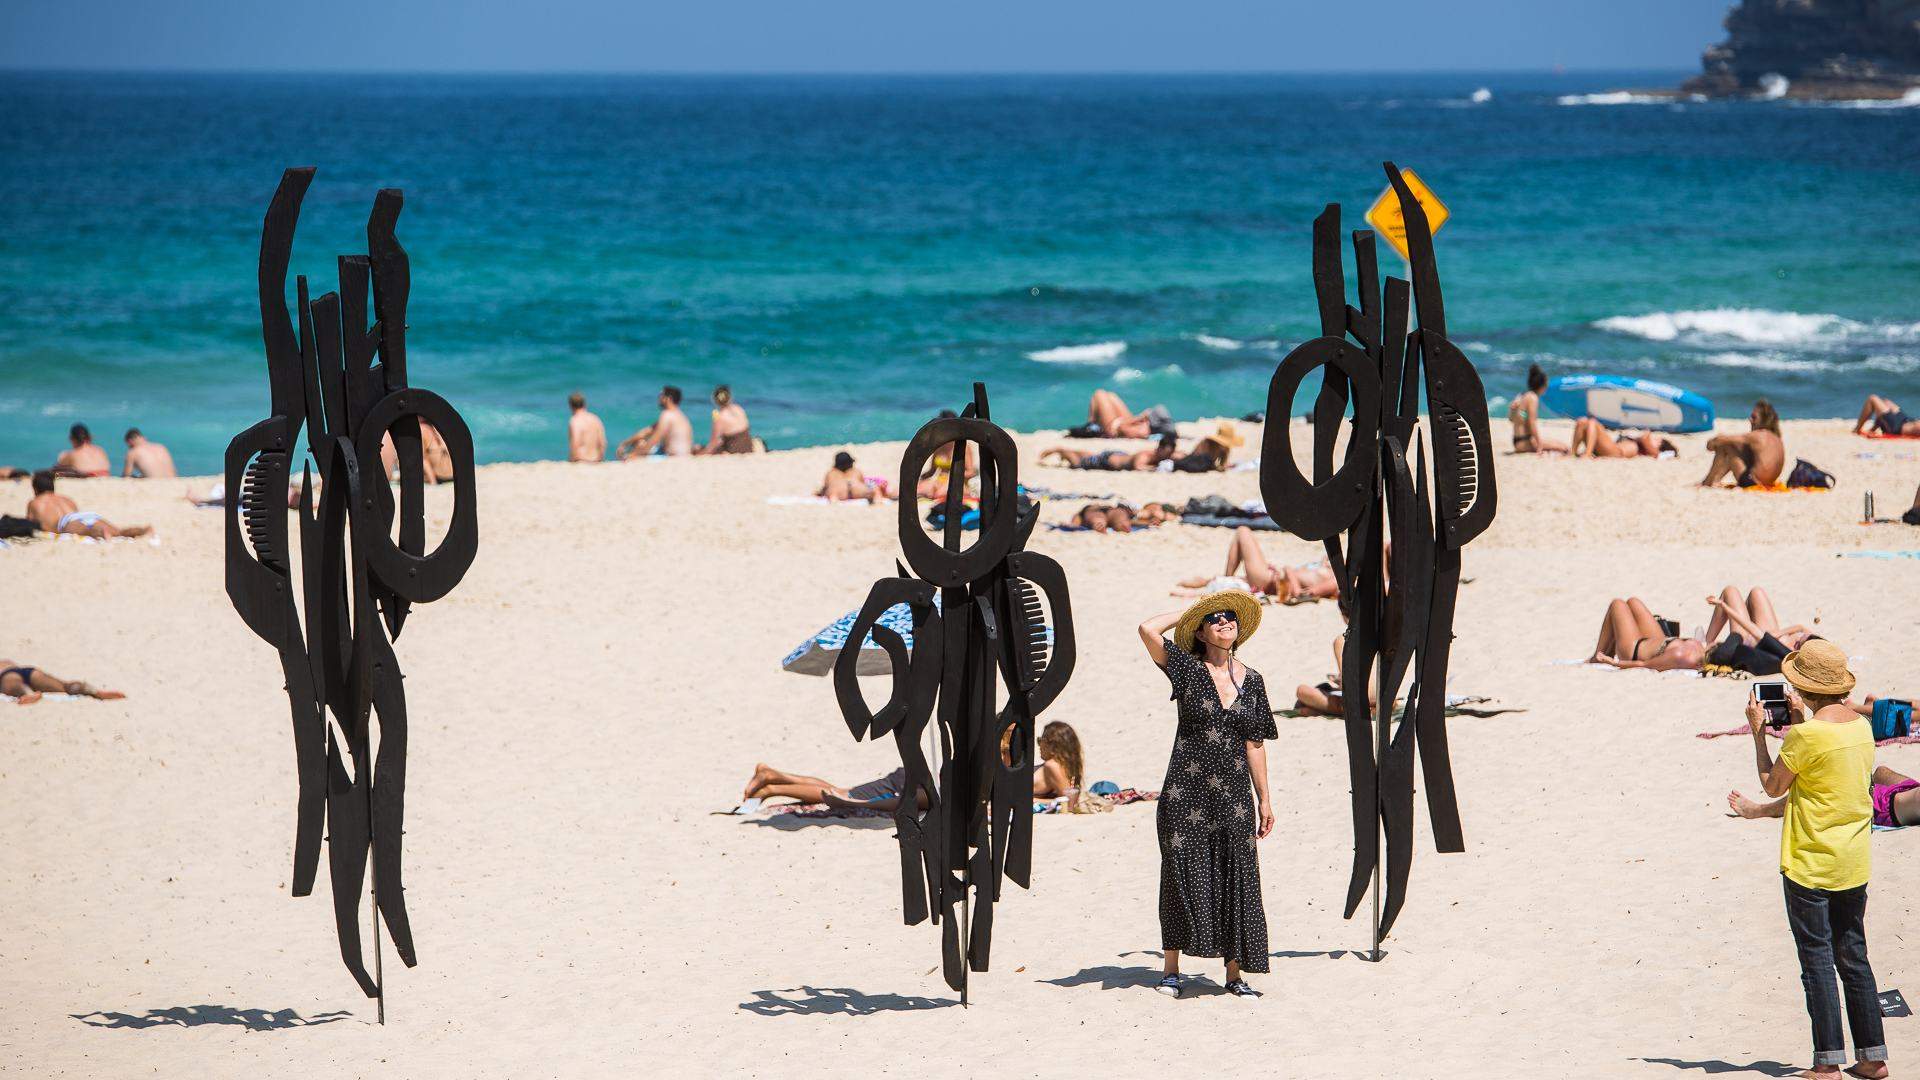 Sculpture by the Sea 2019